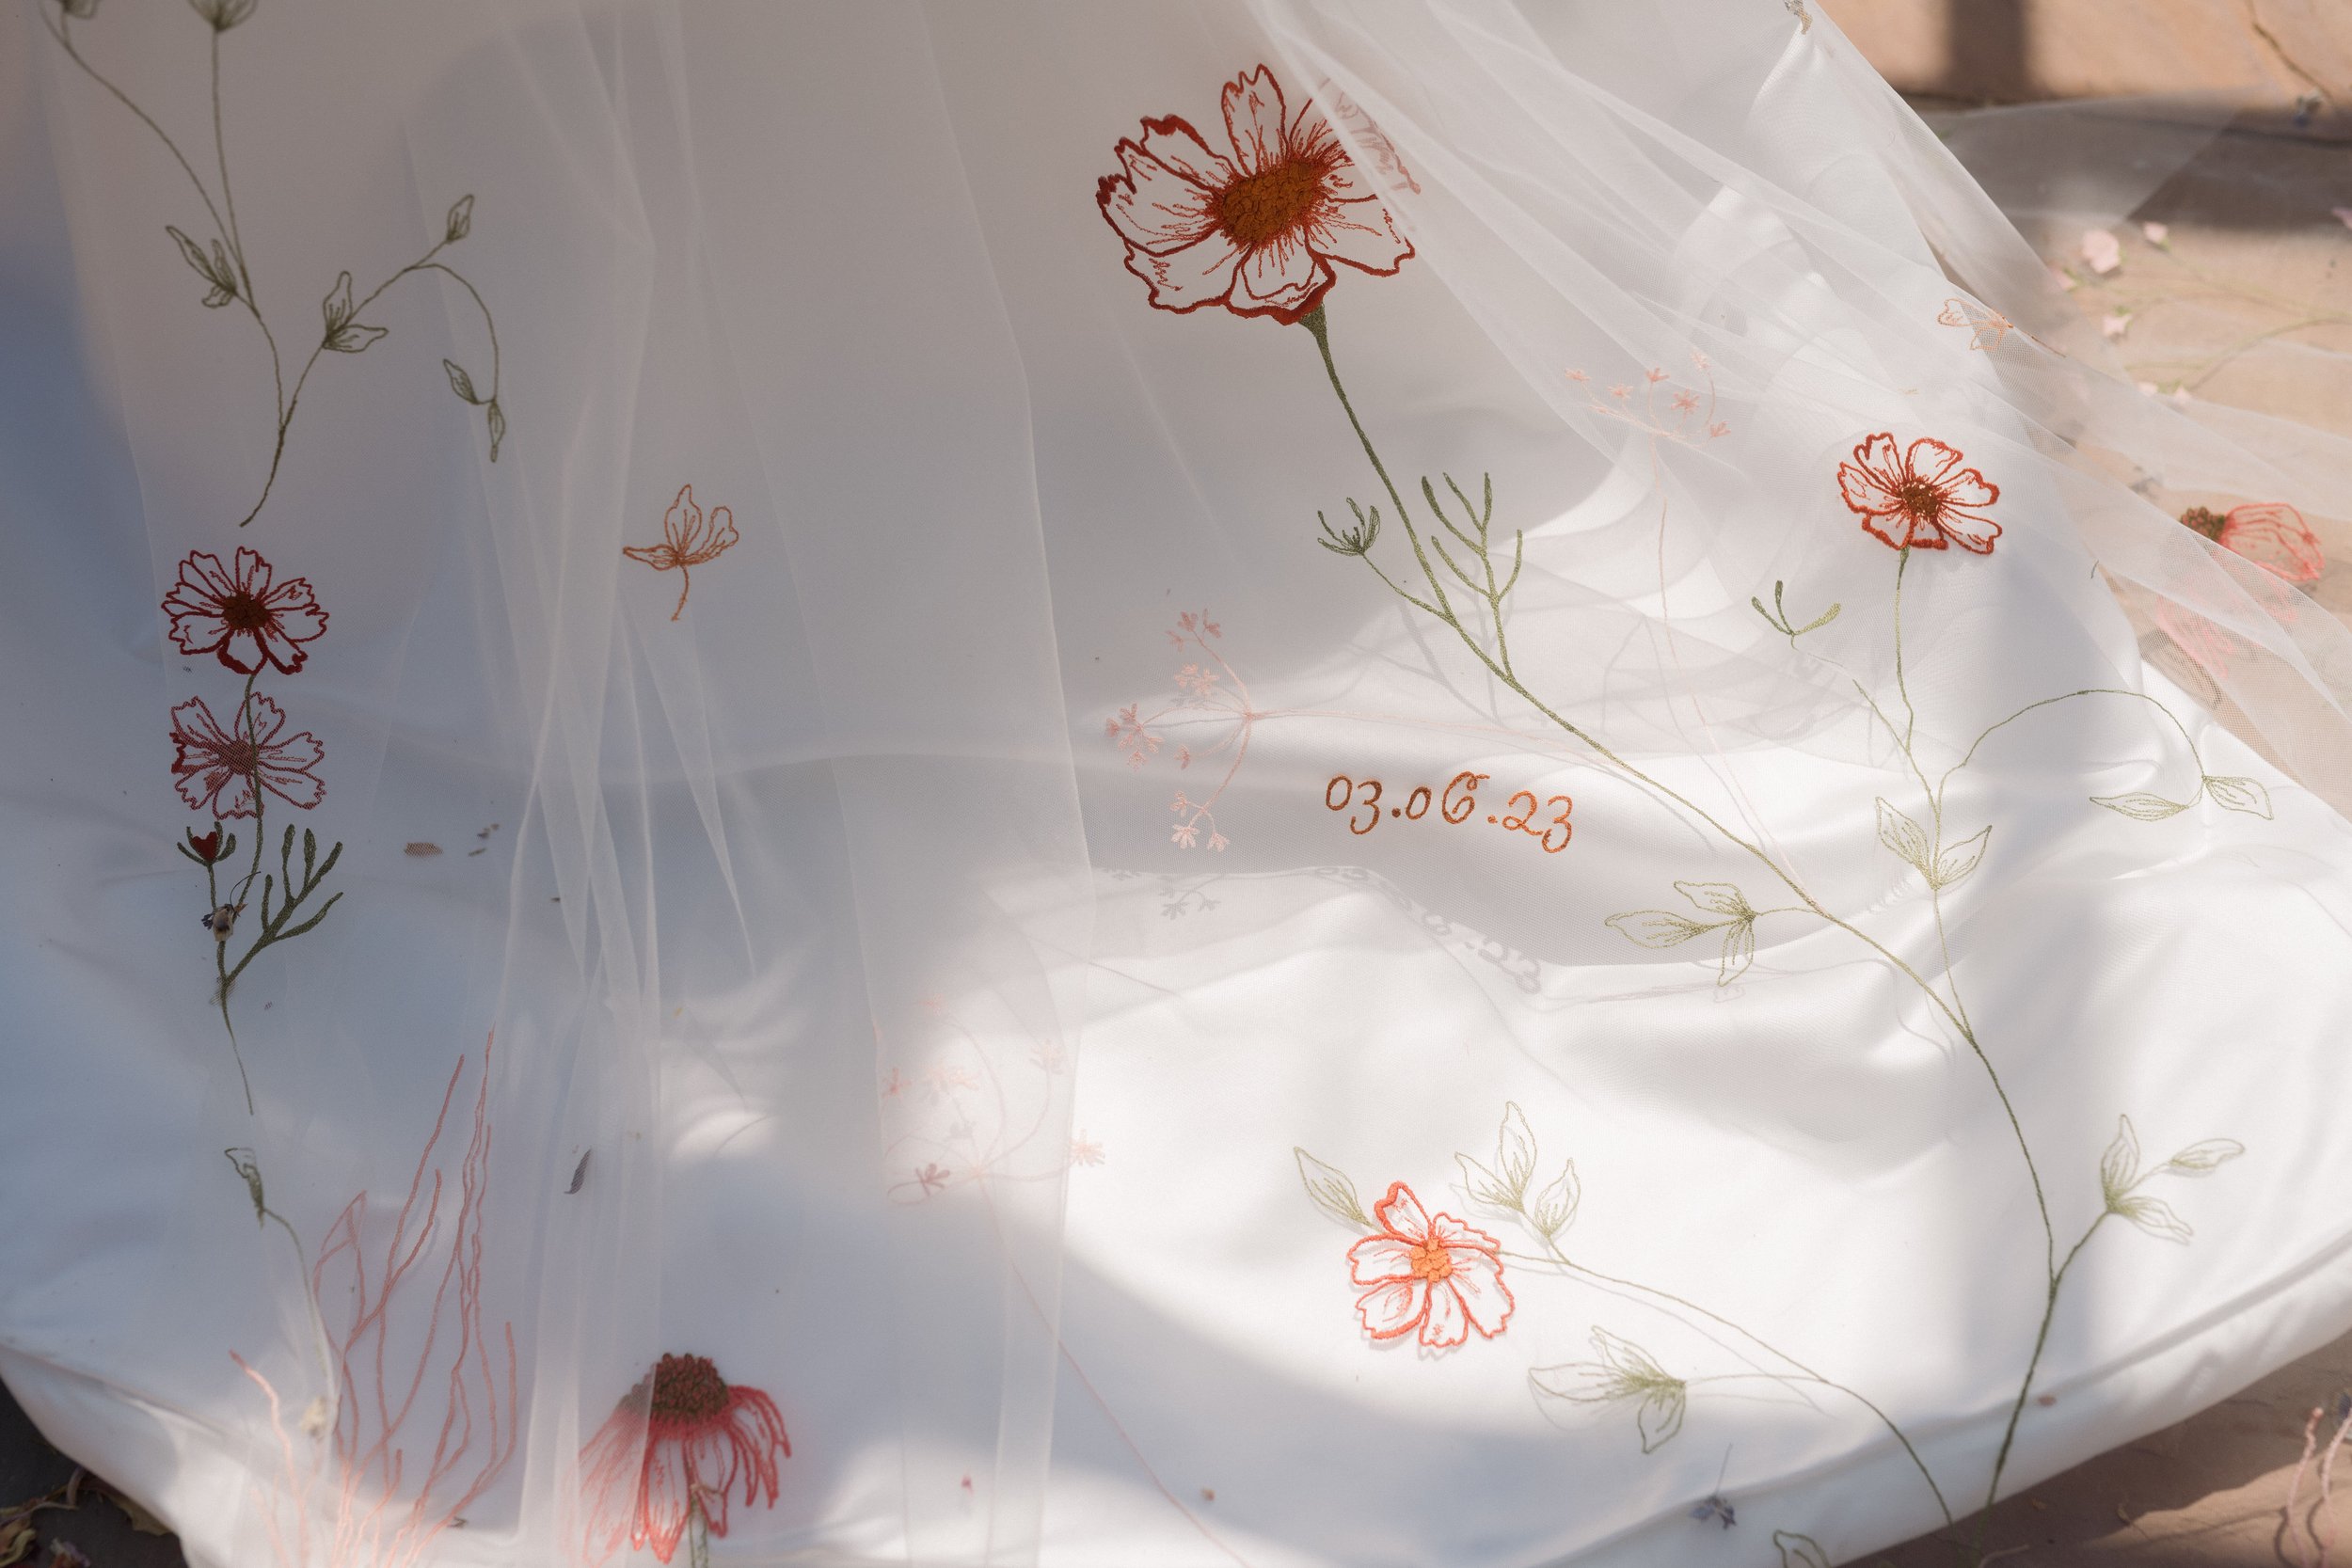  Embroidered veil against train of wedding dress 